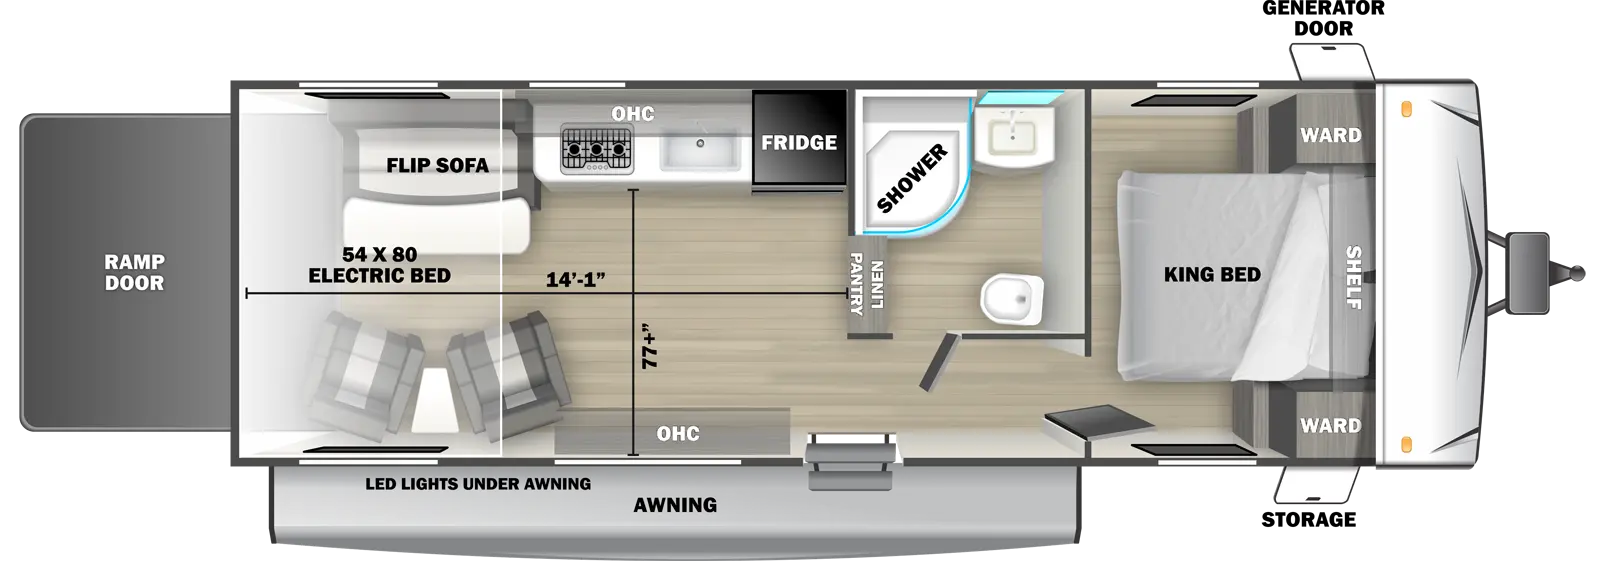 The 2530RLE travel trailer has no slide outs, 1 entry door and 1 rear ramp door. Exterior features include an awning with LED lights, front door side storage and front off-door side generator door. Interior layout from front to back includes: front bedroom with foot-facing King bed, shelf over the bed, and front corner wardrobes; off-door side bathroom with shower, linen storage, toilet and single sink vanity; off-door side kitchen with stovetop, overhead cabinet, sink and refrigerator; door side overhead cabinet; 54 x 80 electric bed sits over 2 recliners with end table and off-door side flip sofa. Cargo length from rear of unit to kitchen wall is 14 ft. 1 in. Cargo width from kitchen countertop to door side wall is 77 inches.